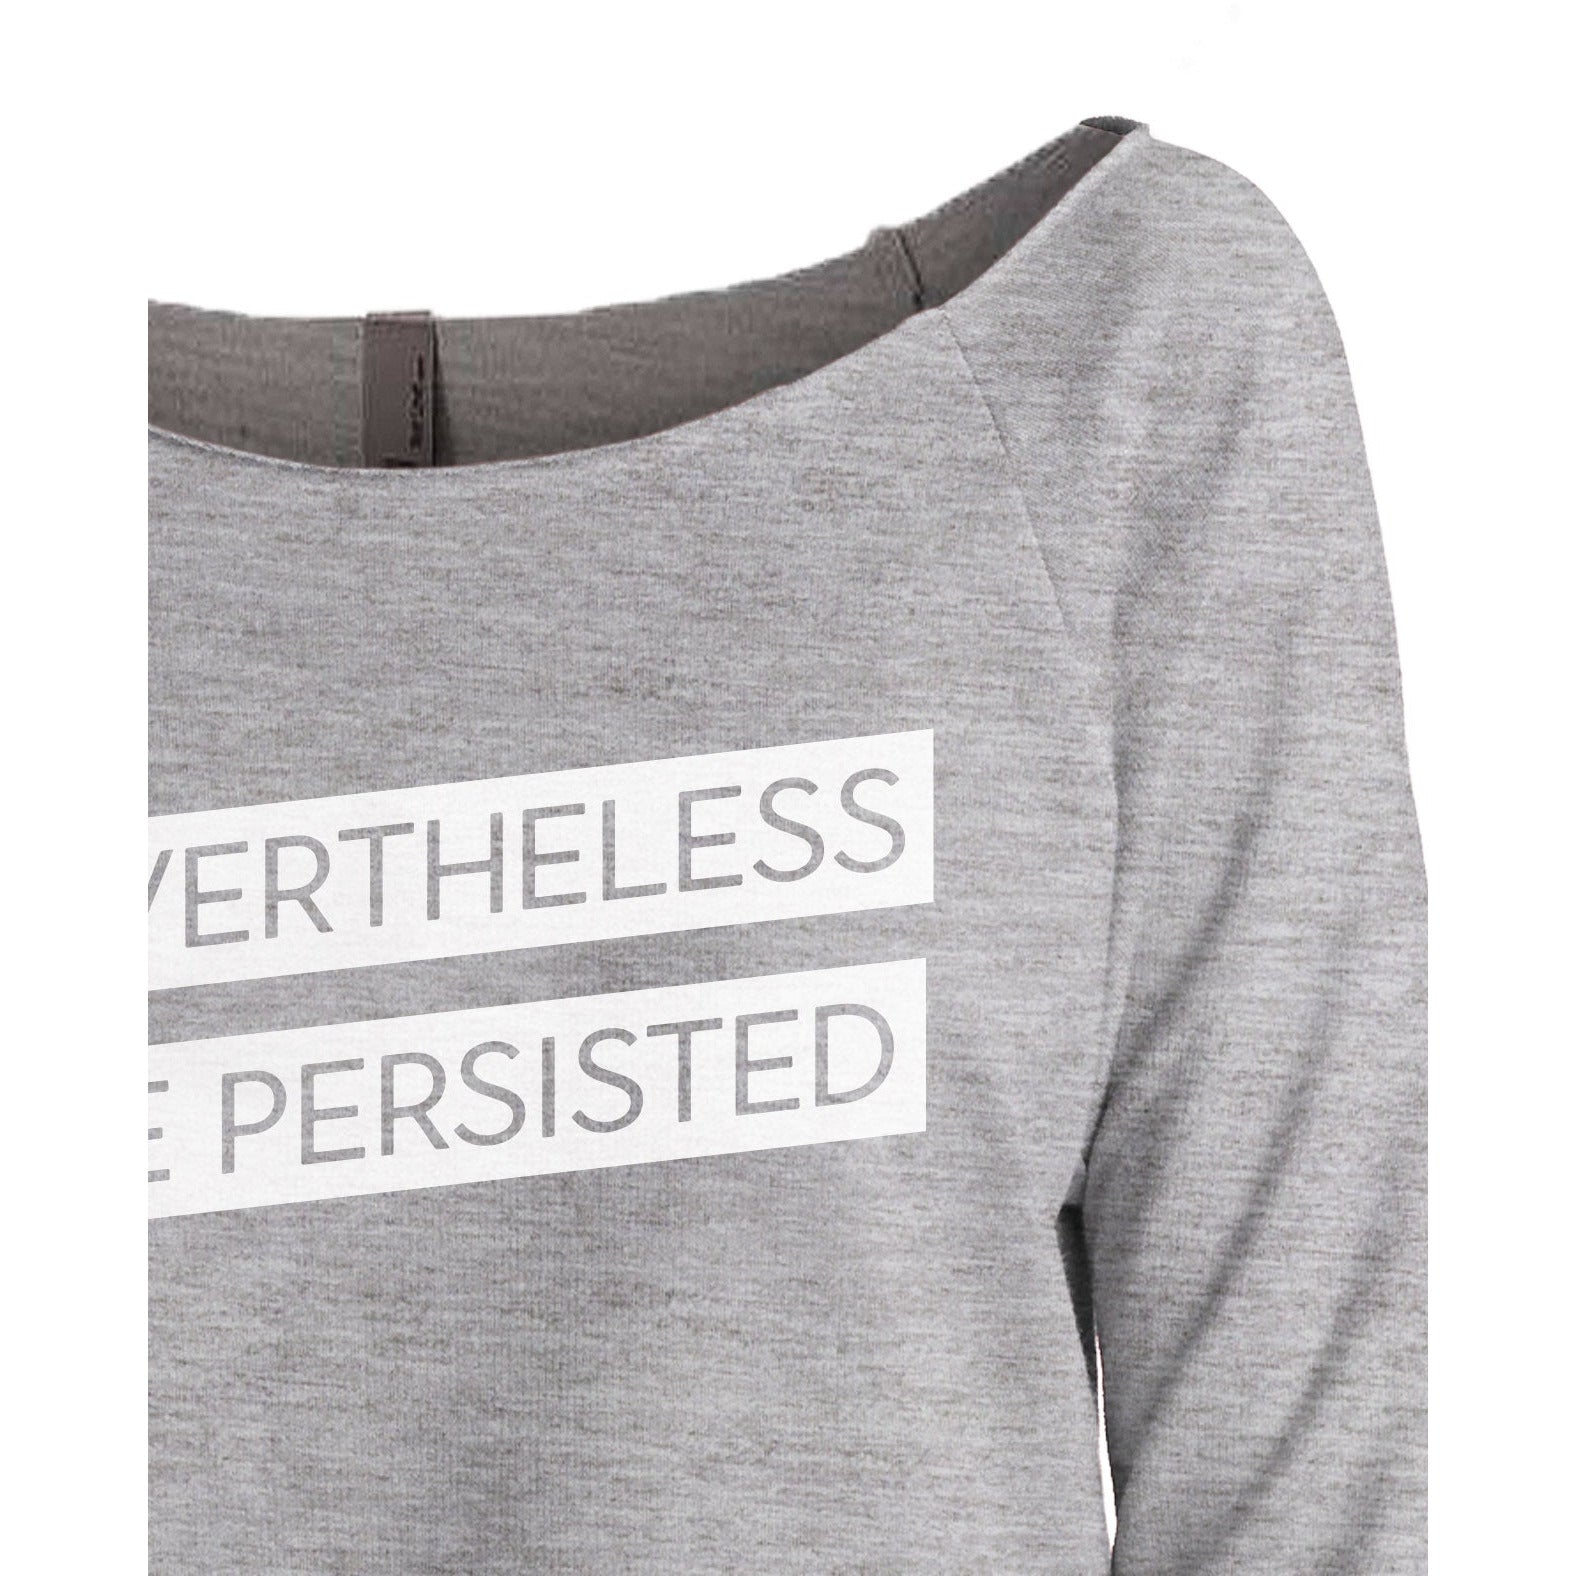 Nevertheless She Persisted Women's Graphic Printed Lightweight Slouchy 3/4 Sleeves Sweatshirt Sport Grey Closeup